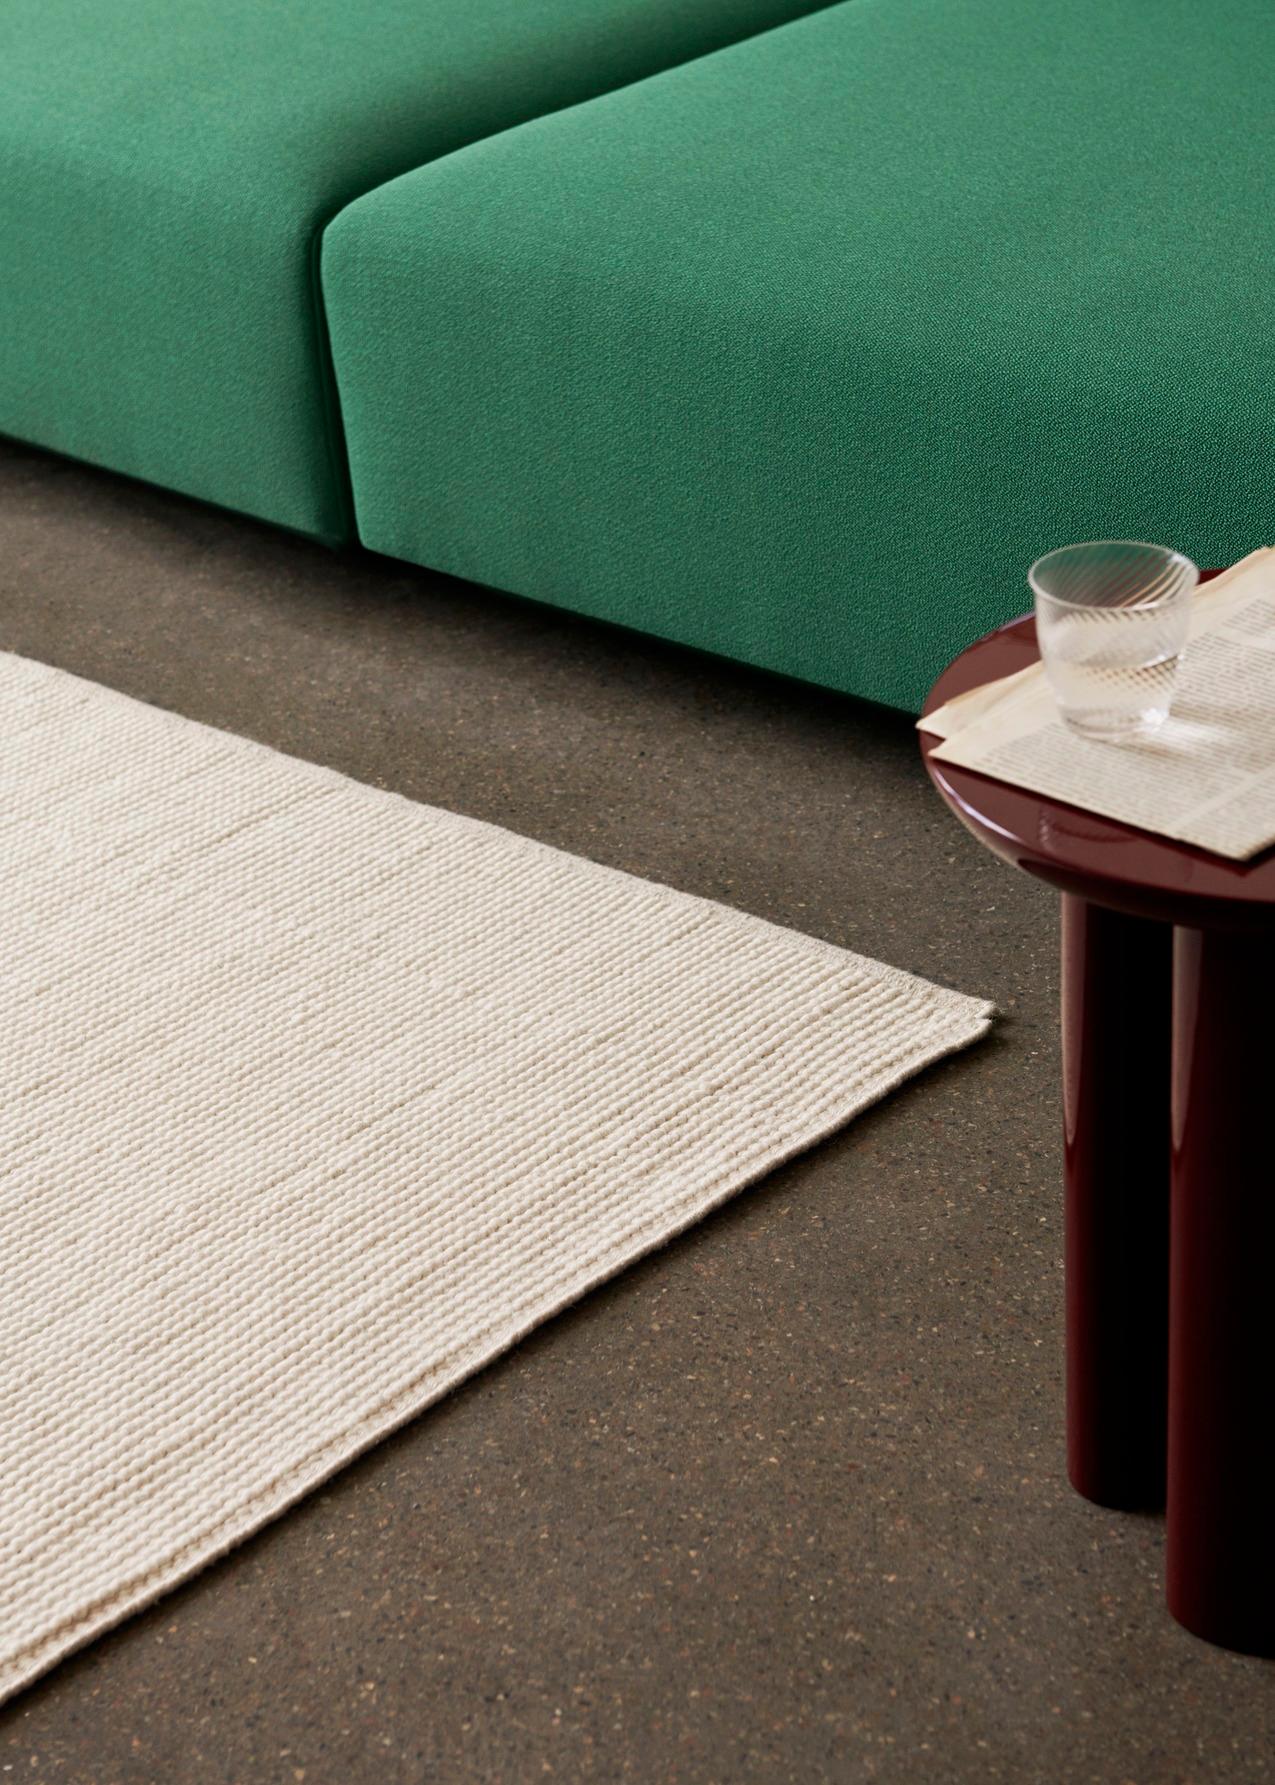 The Collect rugs are crafted by skilled artisans in Bikaner, India, with the undyed natural wool woven on a handloom. The work and expertise invested into each rug underscores the artistry of the piece that can be found in both Collect's design as